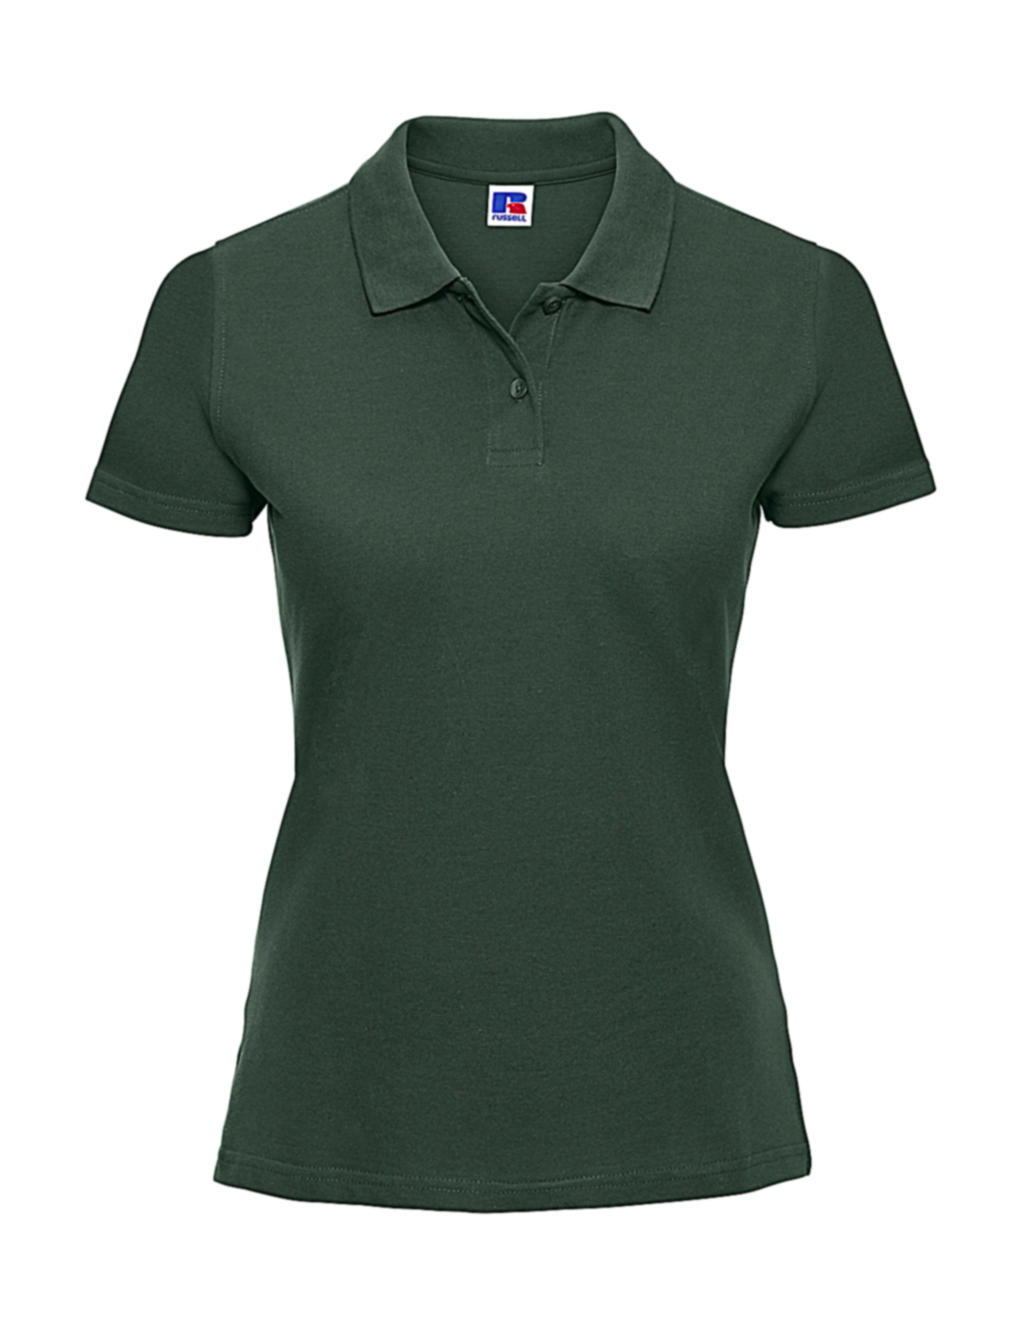  Ladies Classic Cotton Polo in Farbe Bottle Green